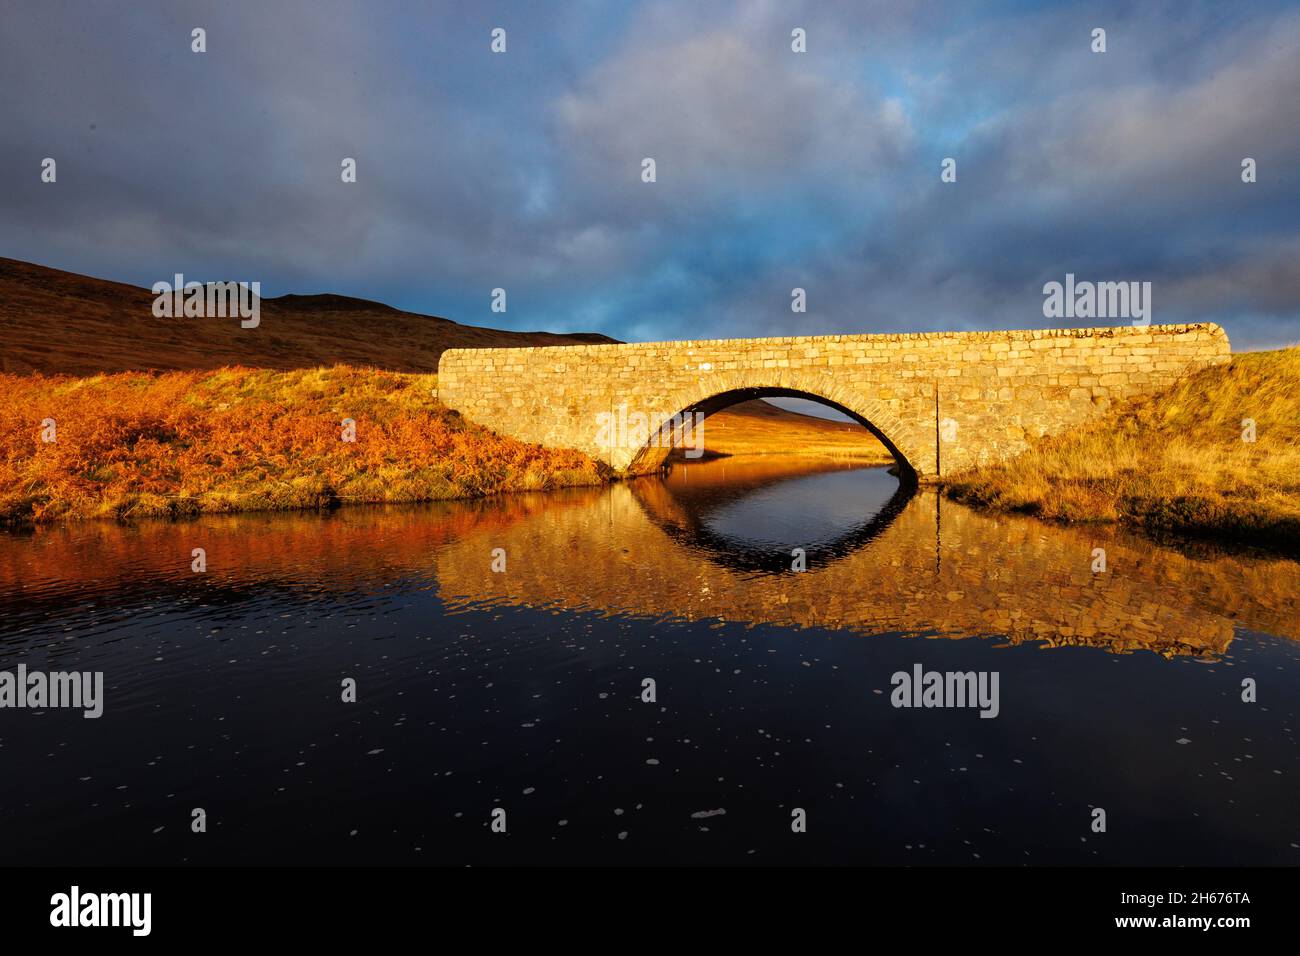 A stone bridge supporting route A836 spans Lon Achadh na h-Albhne, a river connecting Loch Coulside to Loch Loyal in Sutherland County, Scotland. Stock Photo